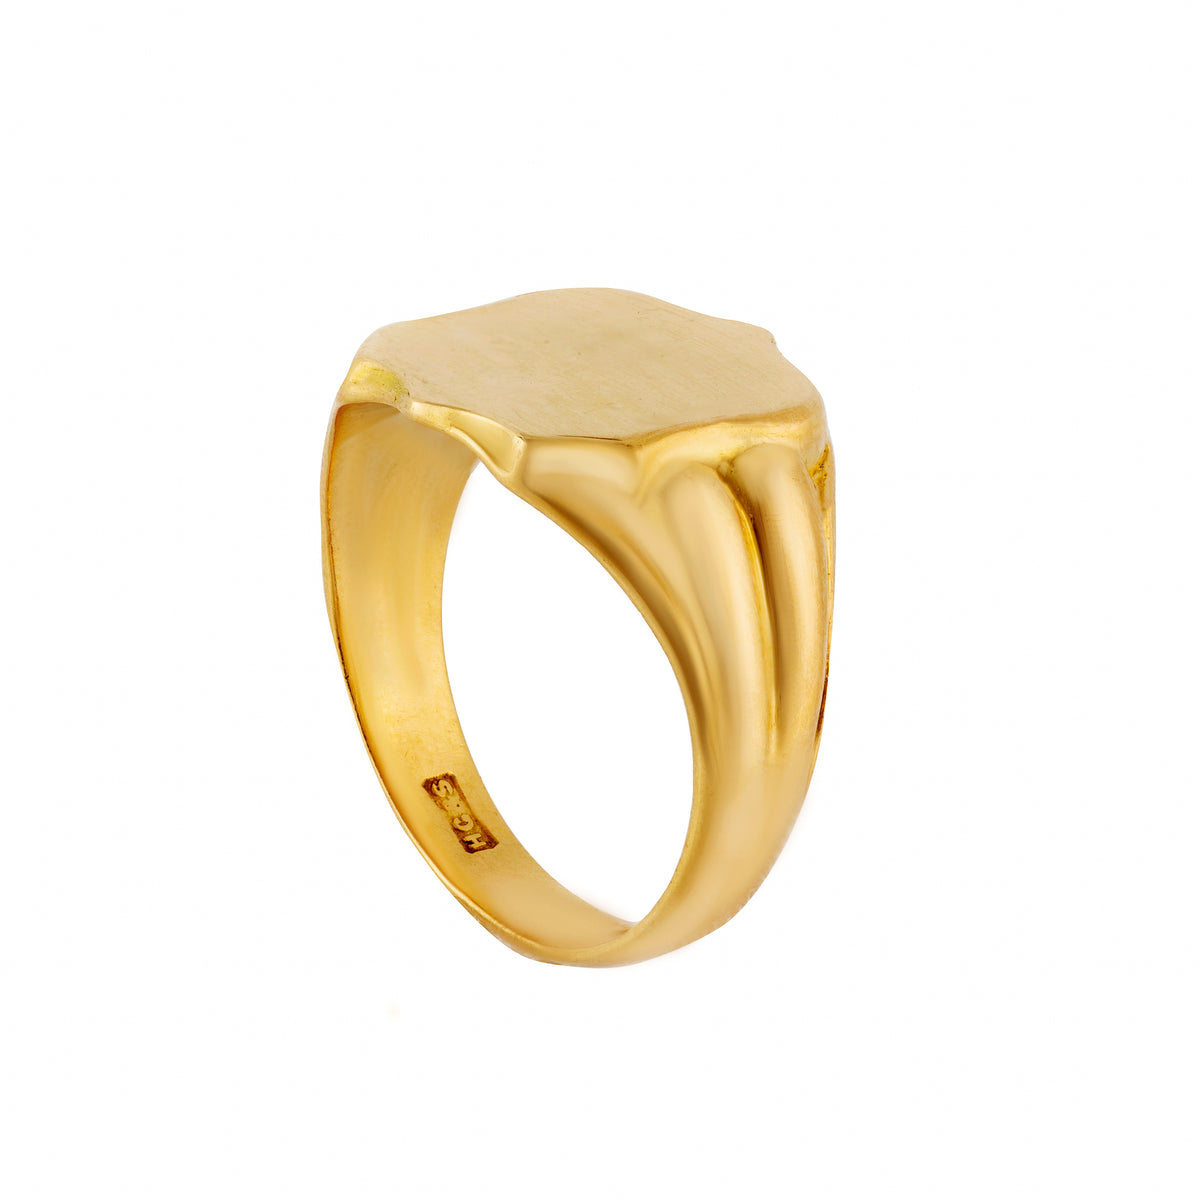 A Gold Shield Signet Ring